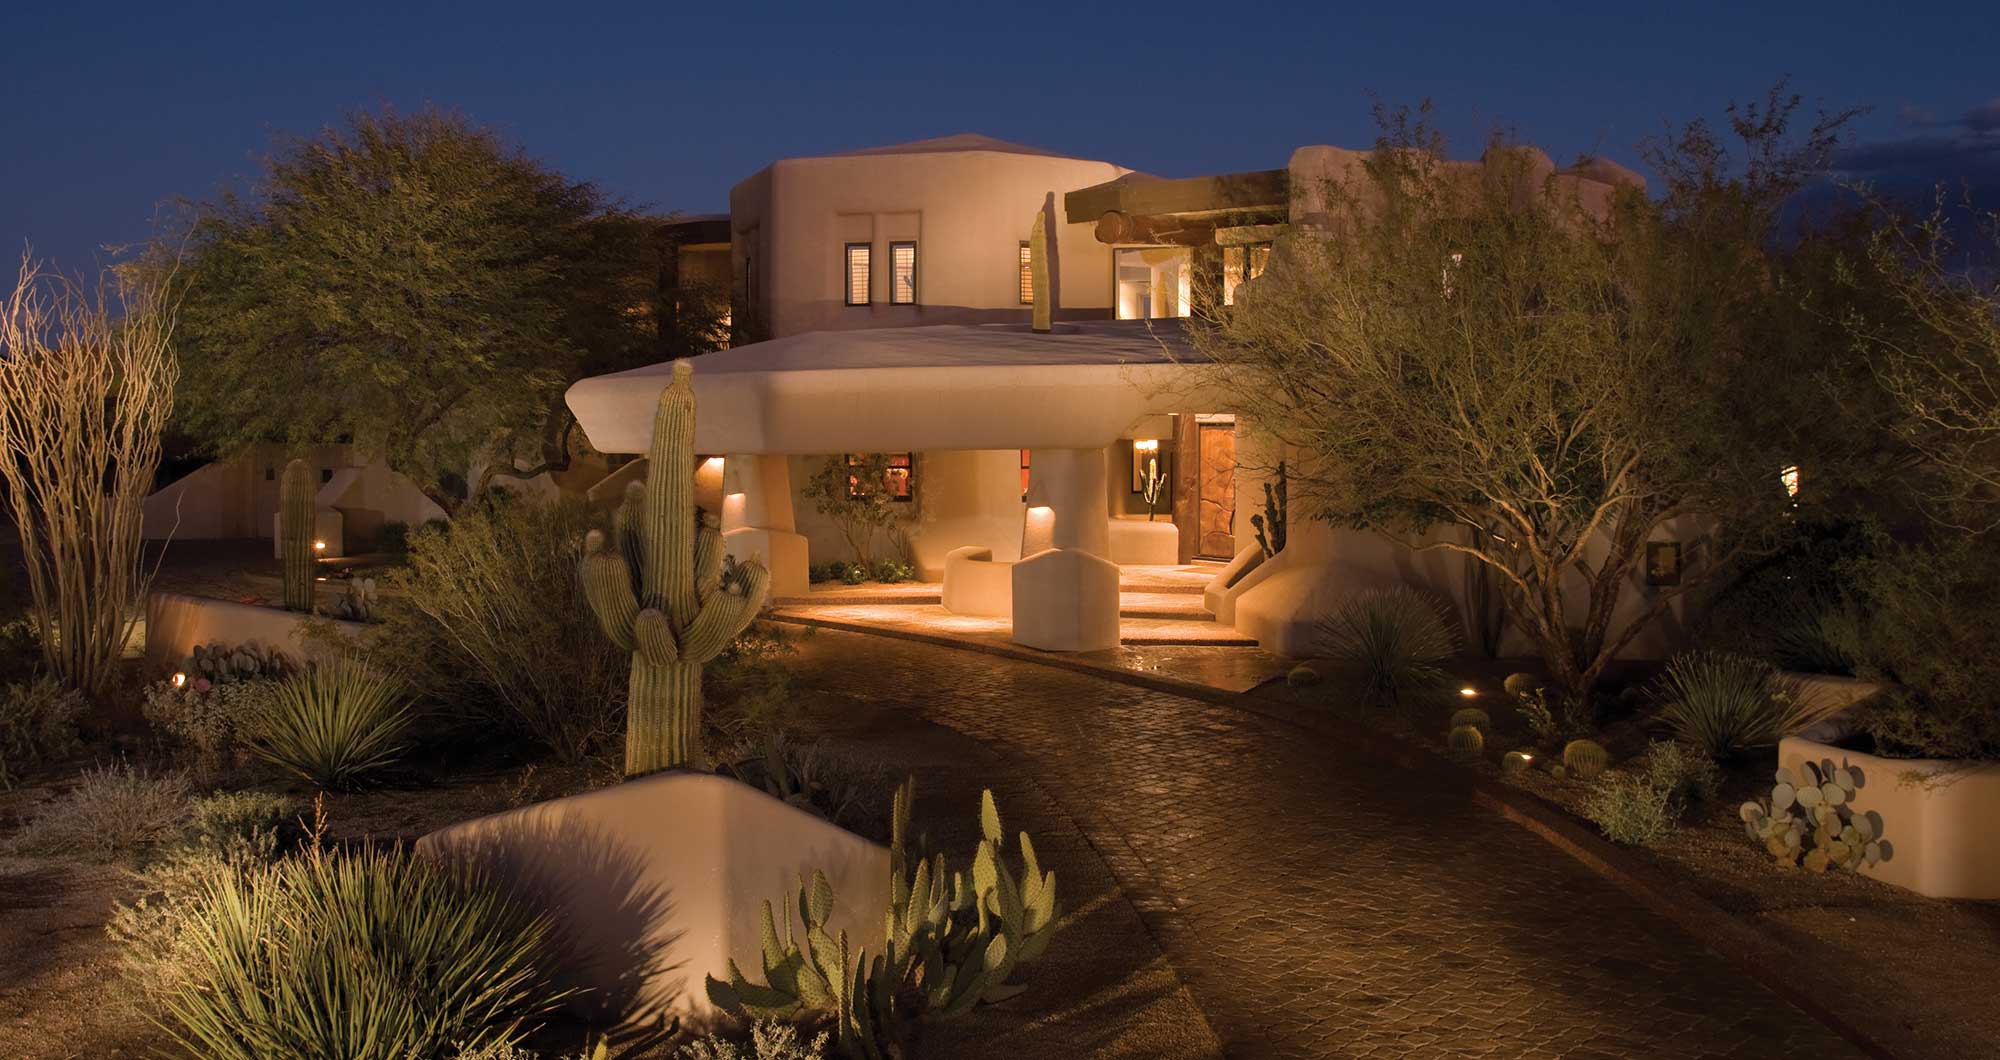 Bowman House (SOLD) - Windmill Scottsdale - 8 Luxury Homes on 20 Acres